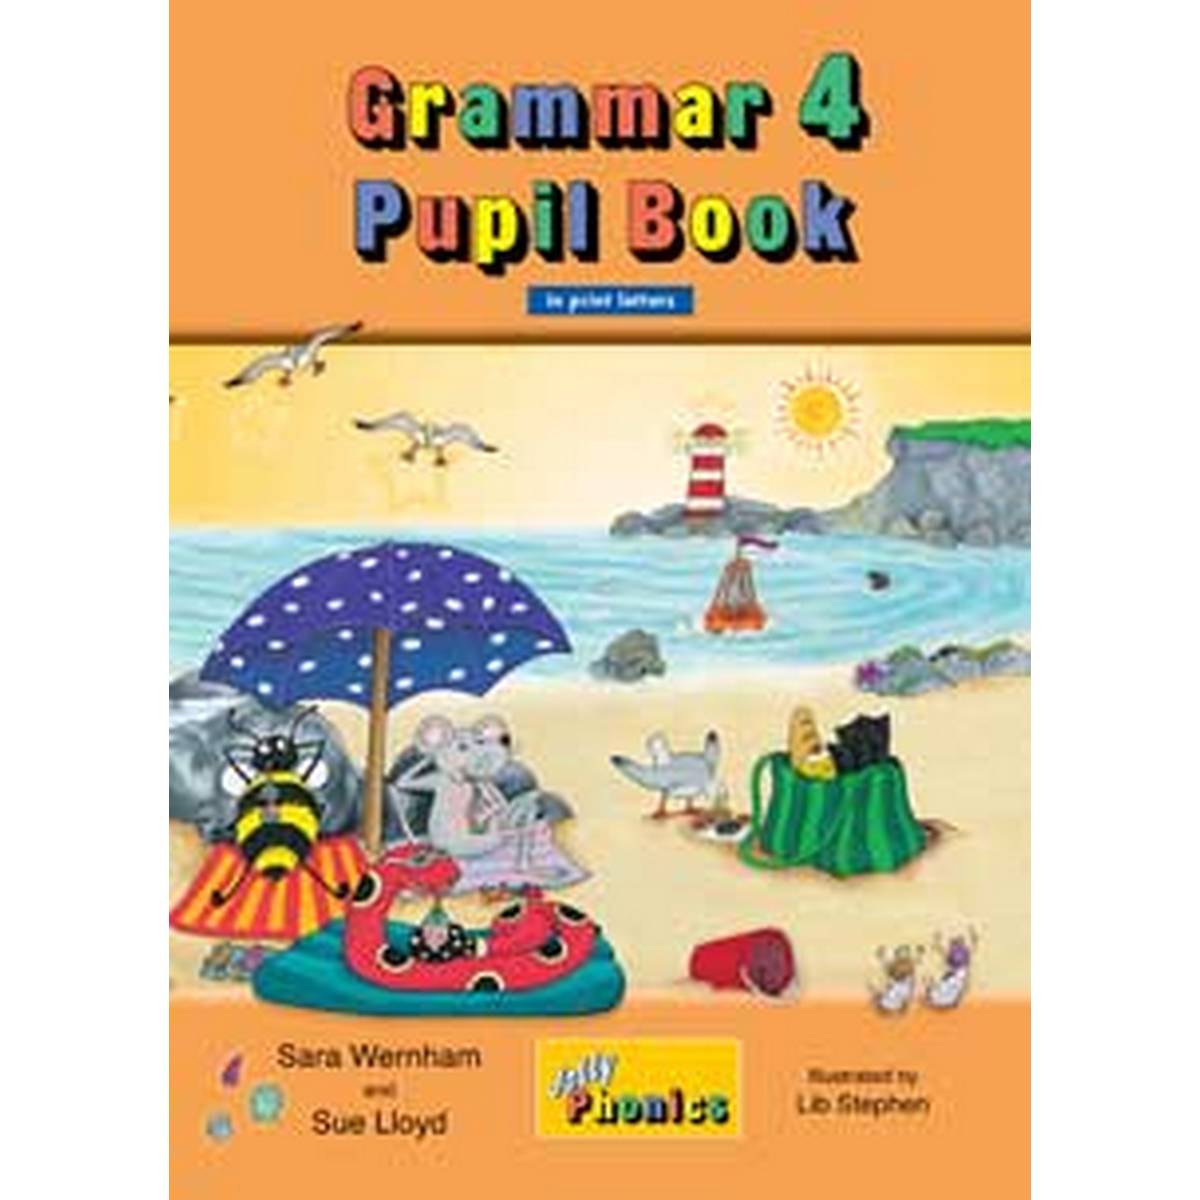 Jolly Grammar 4 Pupil Book (In Print Letters)